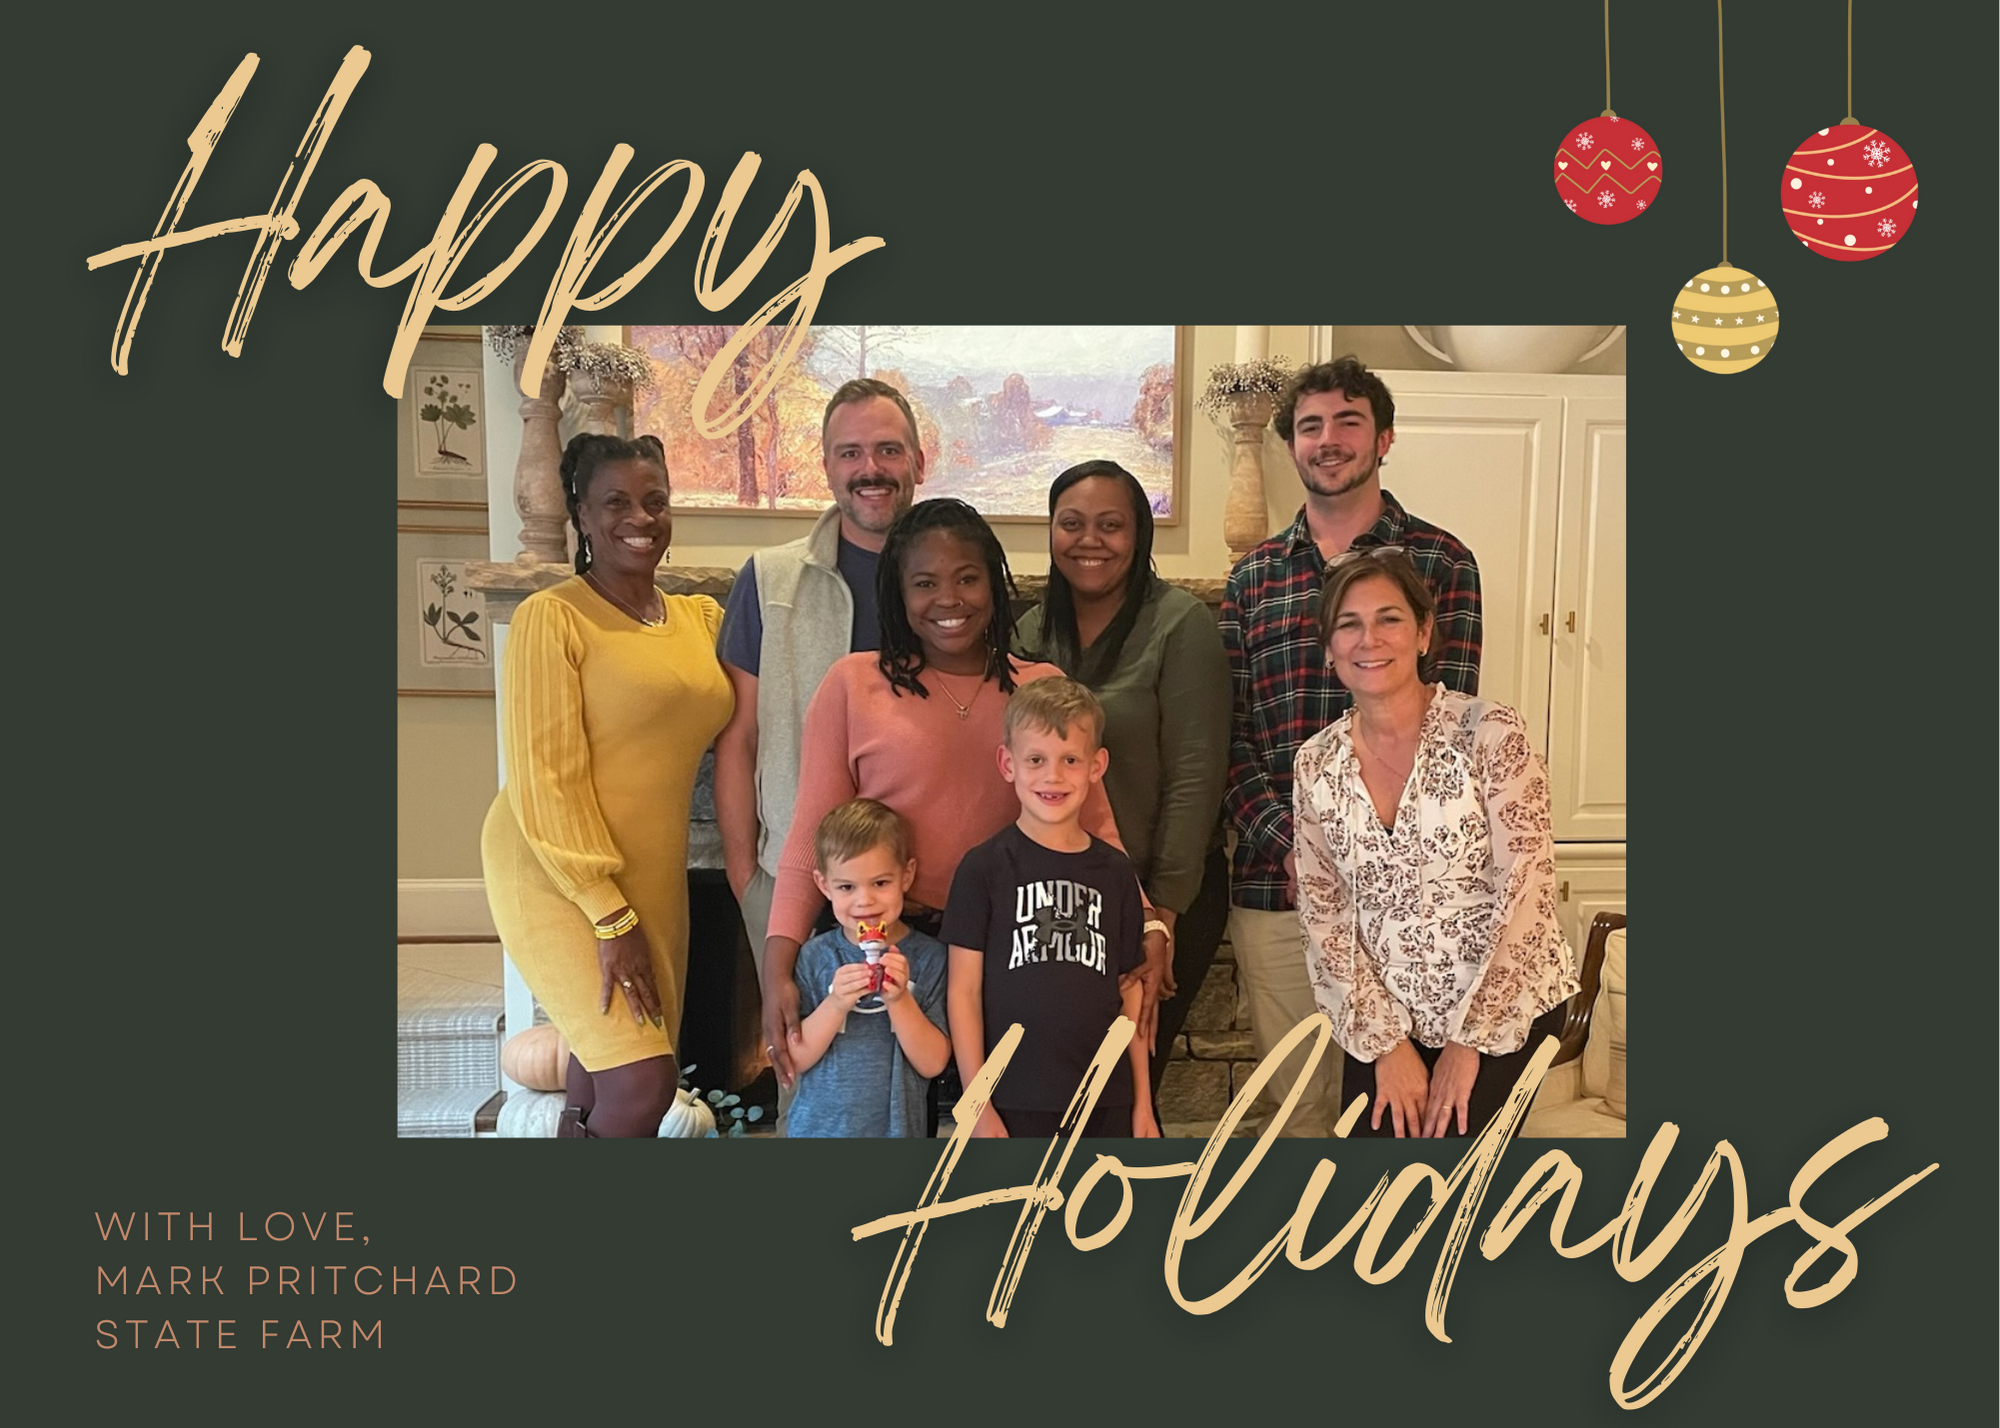 Happy Holidays from Mark Pritchard State Farm Family Mark Pritchard - State Farm Insurance Agent Atlanta (404)856-4950